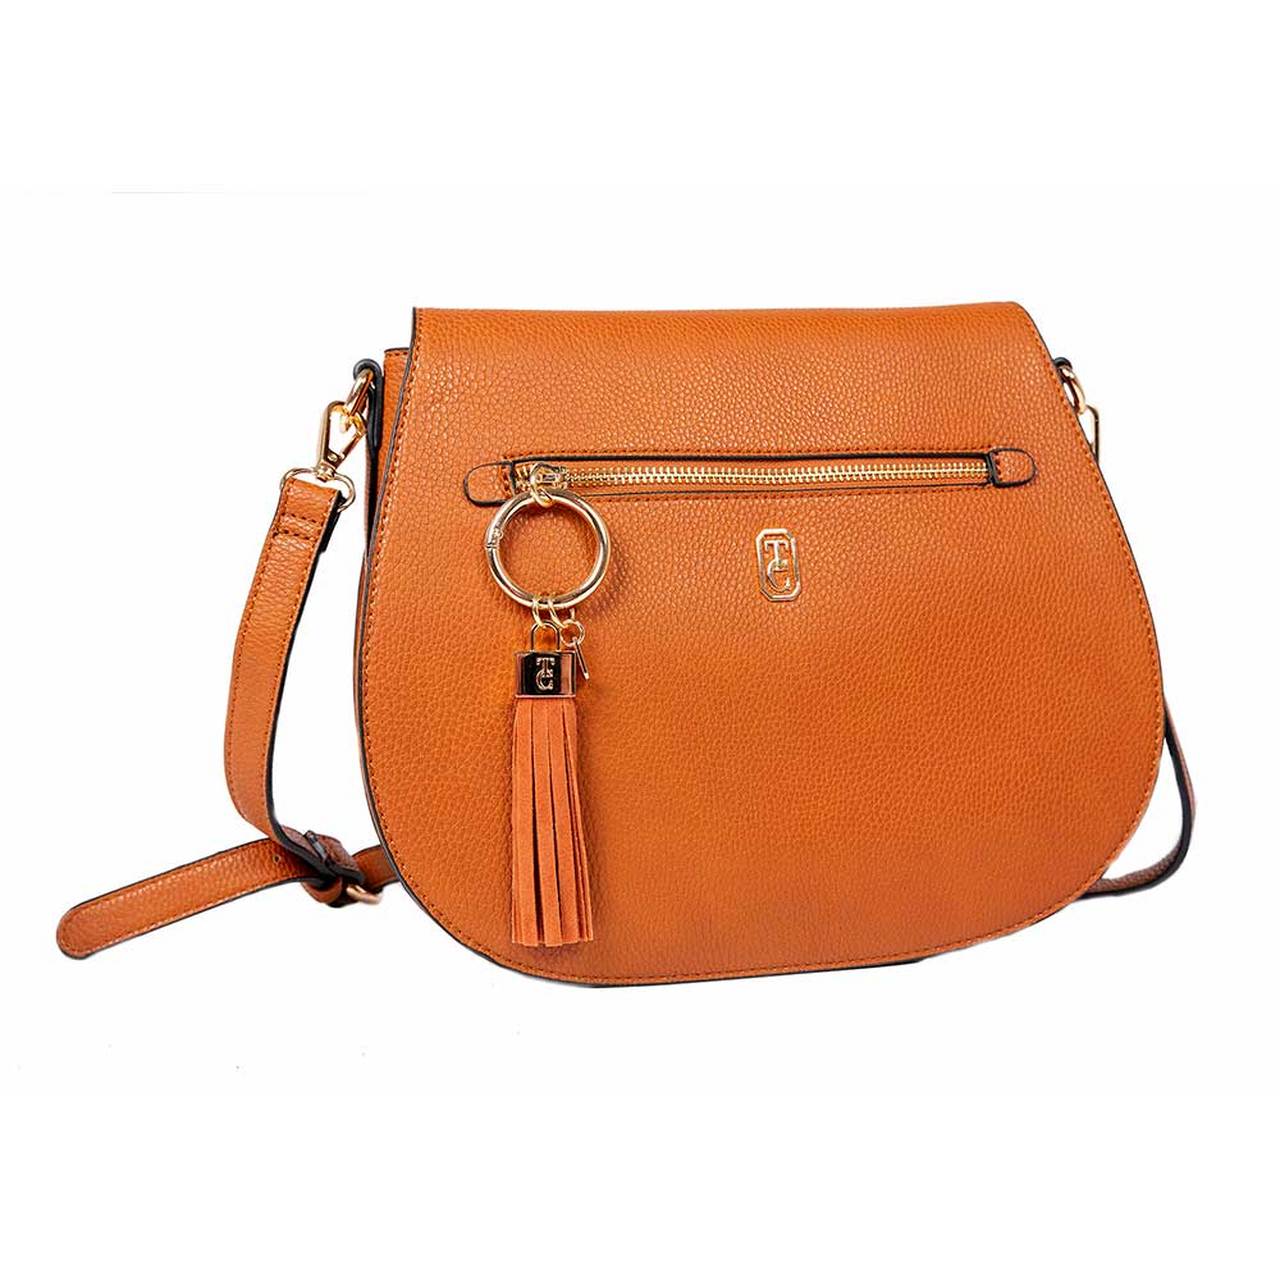 Tipperary Crystal Savoy Large Satchel Bag Brown (Yellow gold hardware)  This stylish new addition to our bag collection is proving to be very popular, with an outside zip compartment the Savoy bag is stylish and functional.